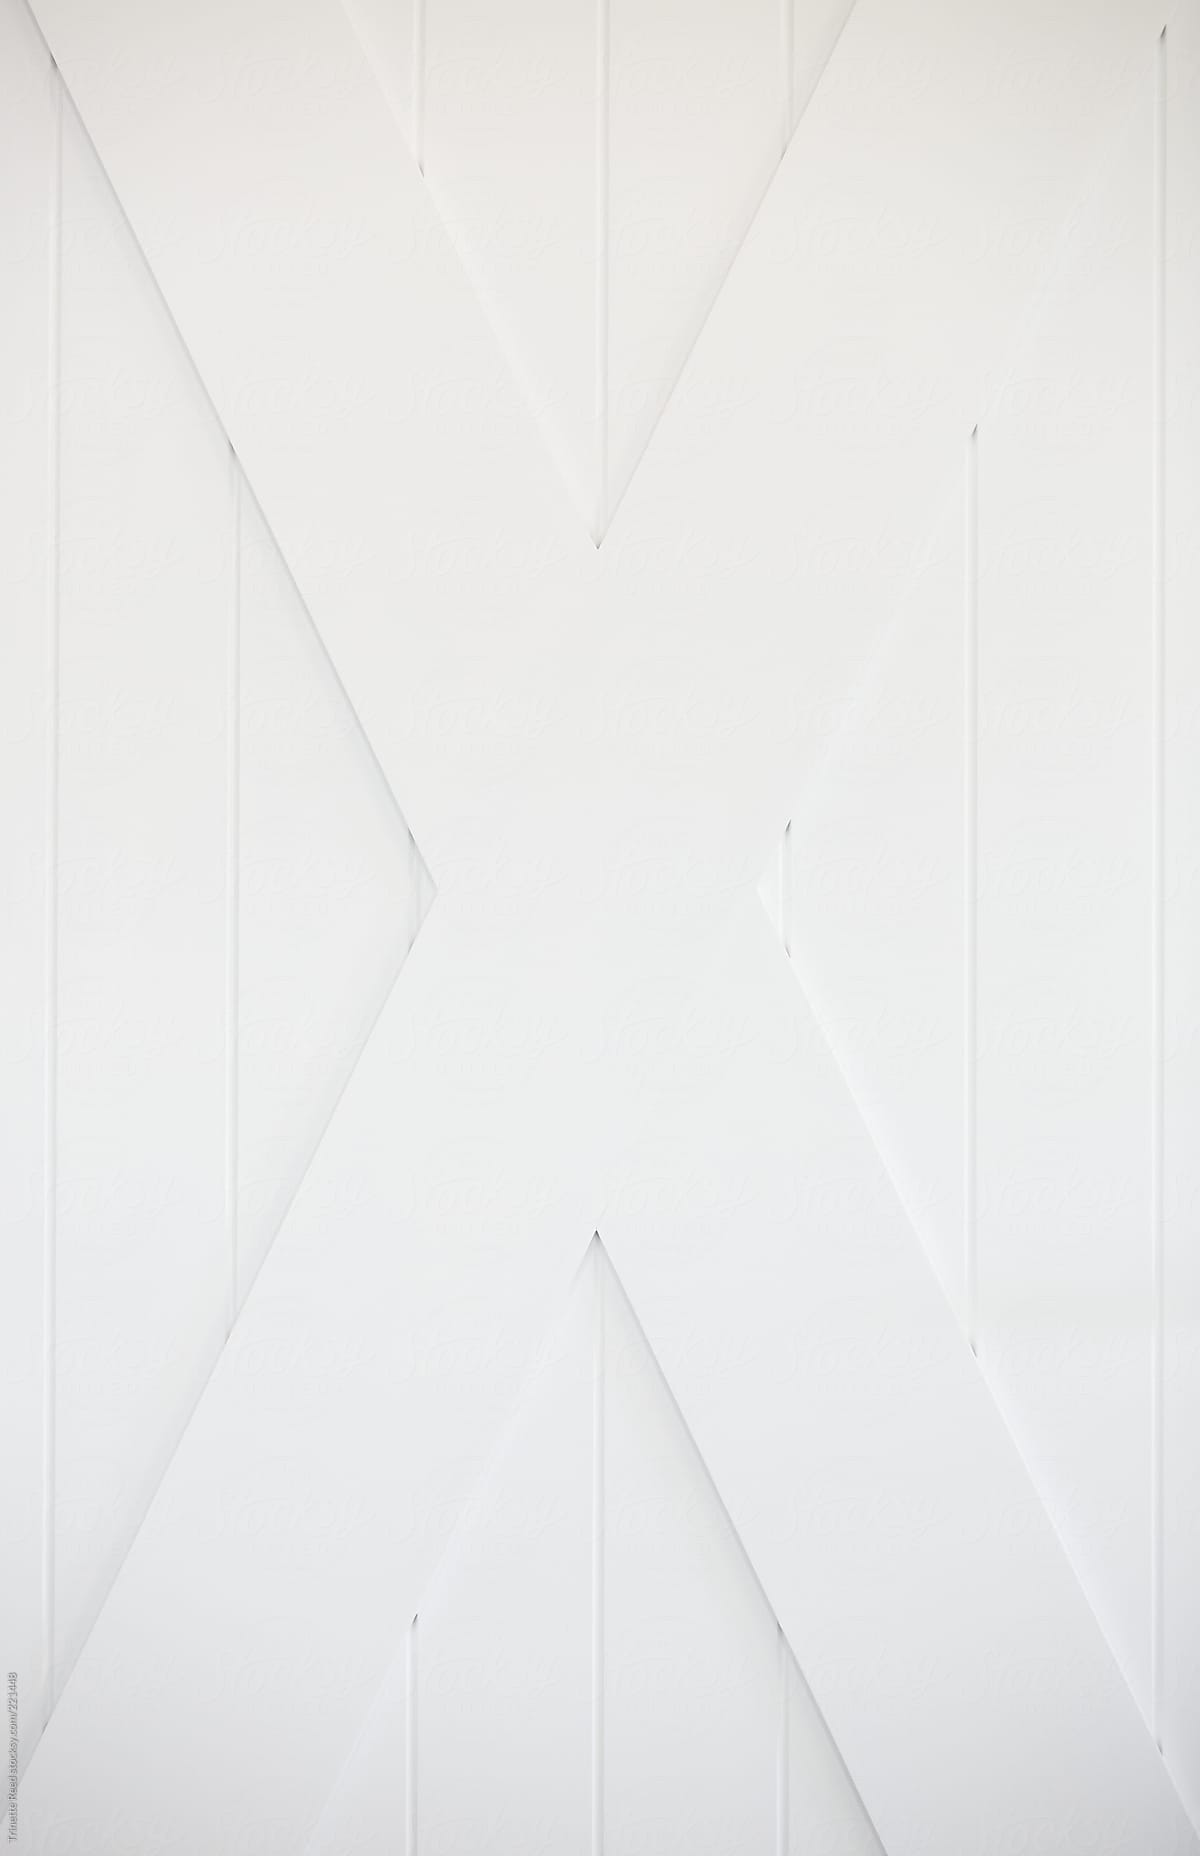 Background image of a white X on door frame